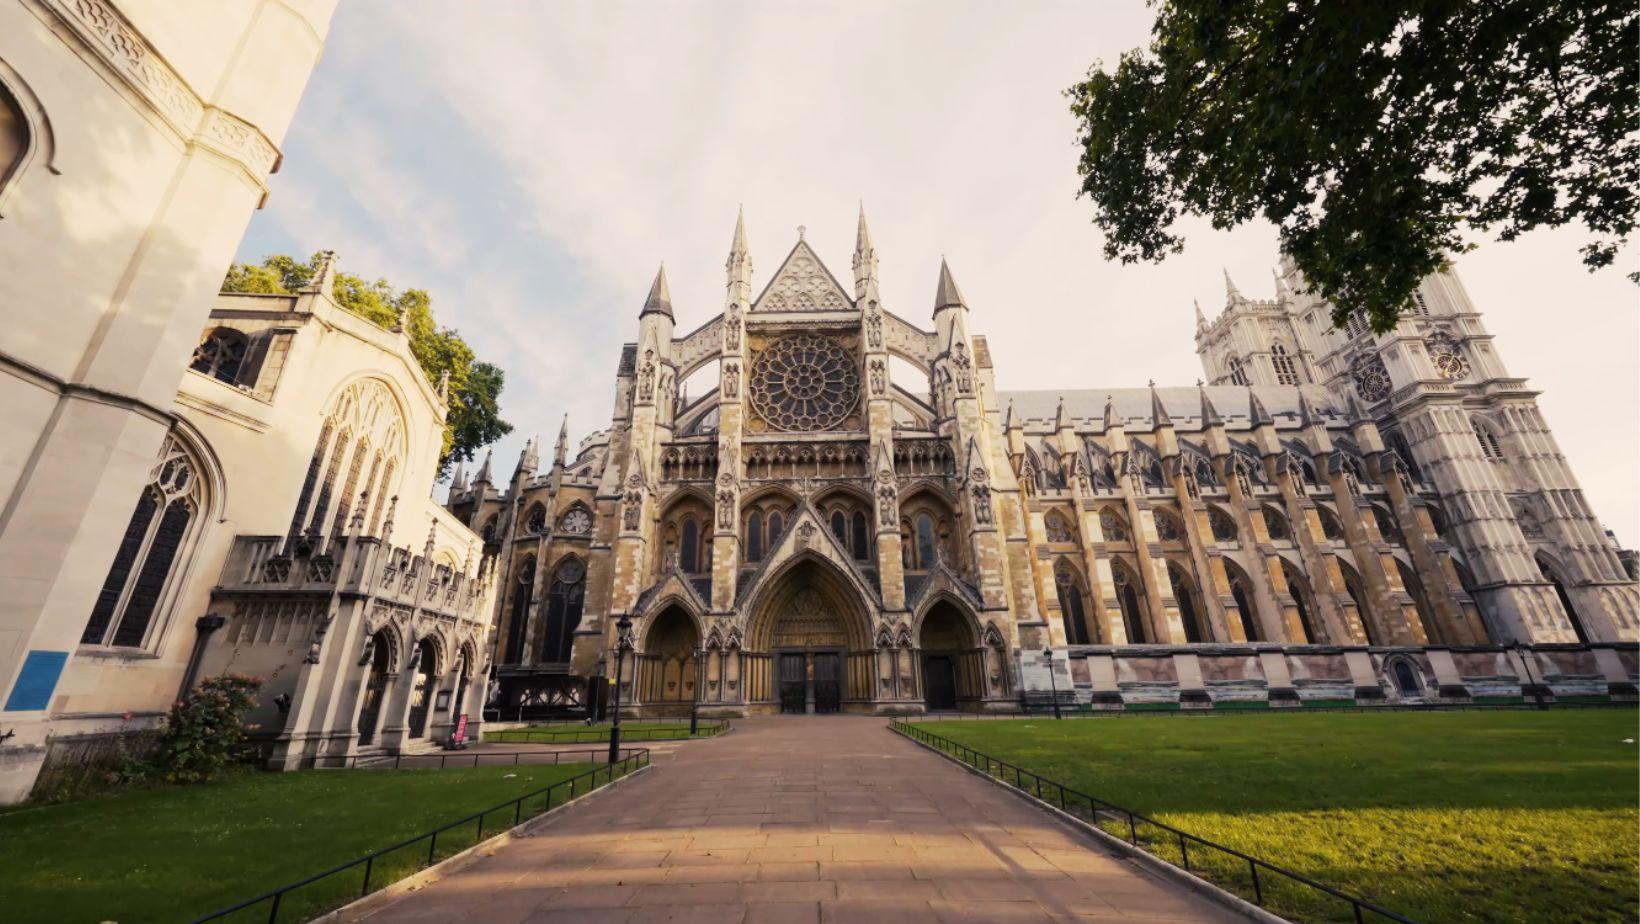 Westminster Abbey Tour: Tickets, Attractions, Timing, Entry Fee!